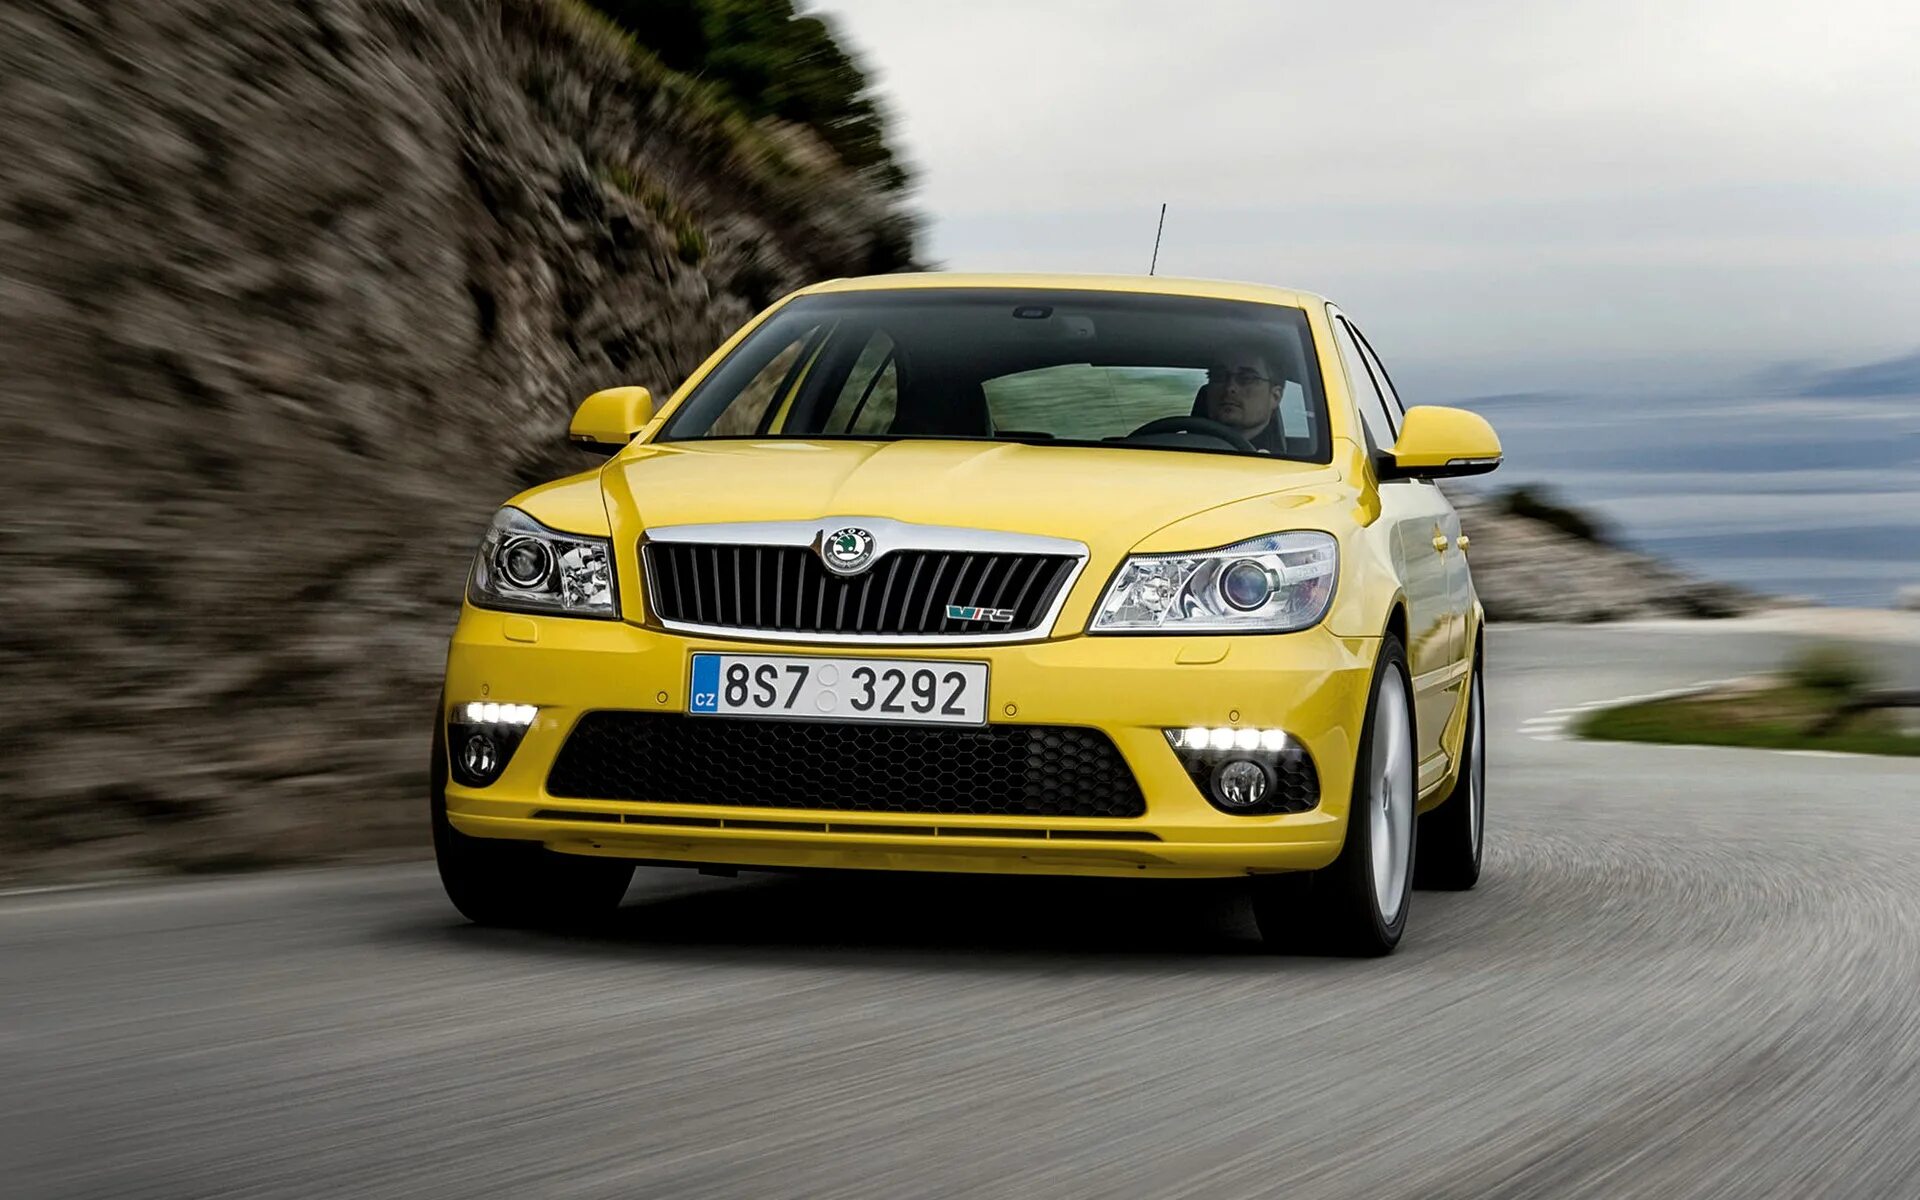 Skoda octavia rs 2012. Skoda Octavia RS 2009. Skoda Octavia RS 2011.